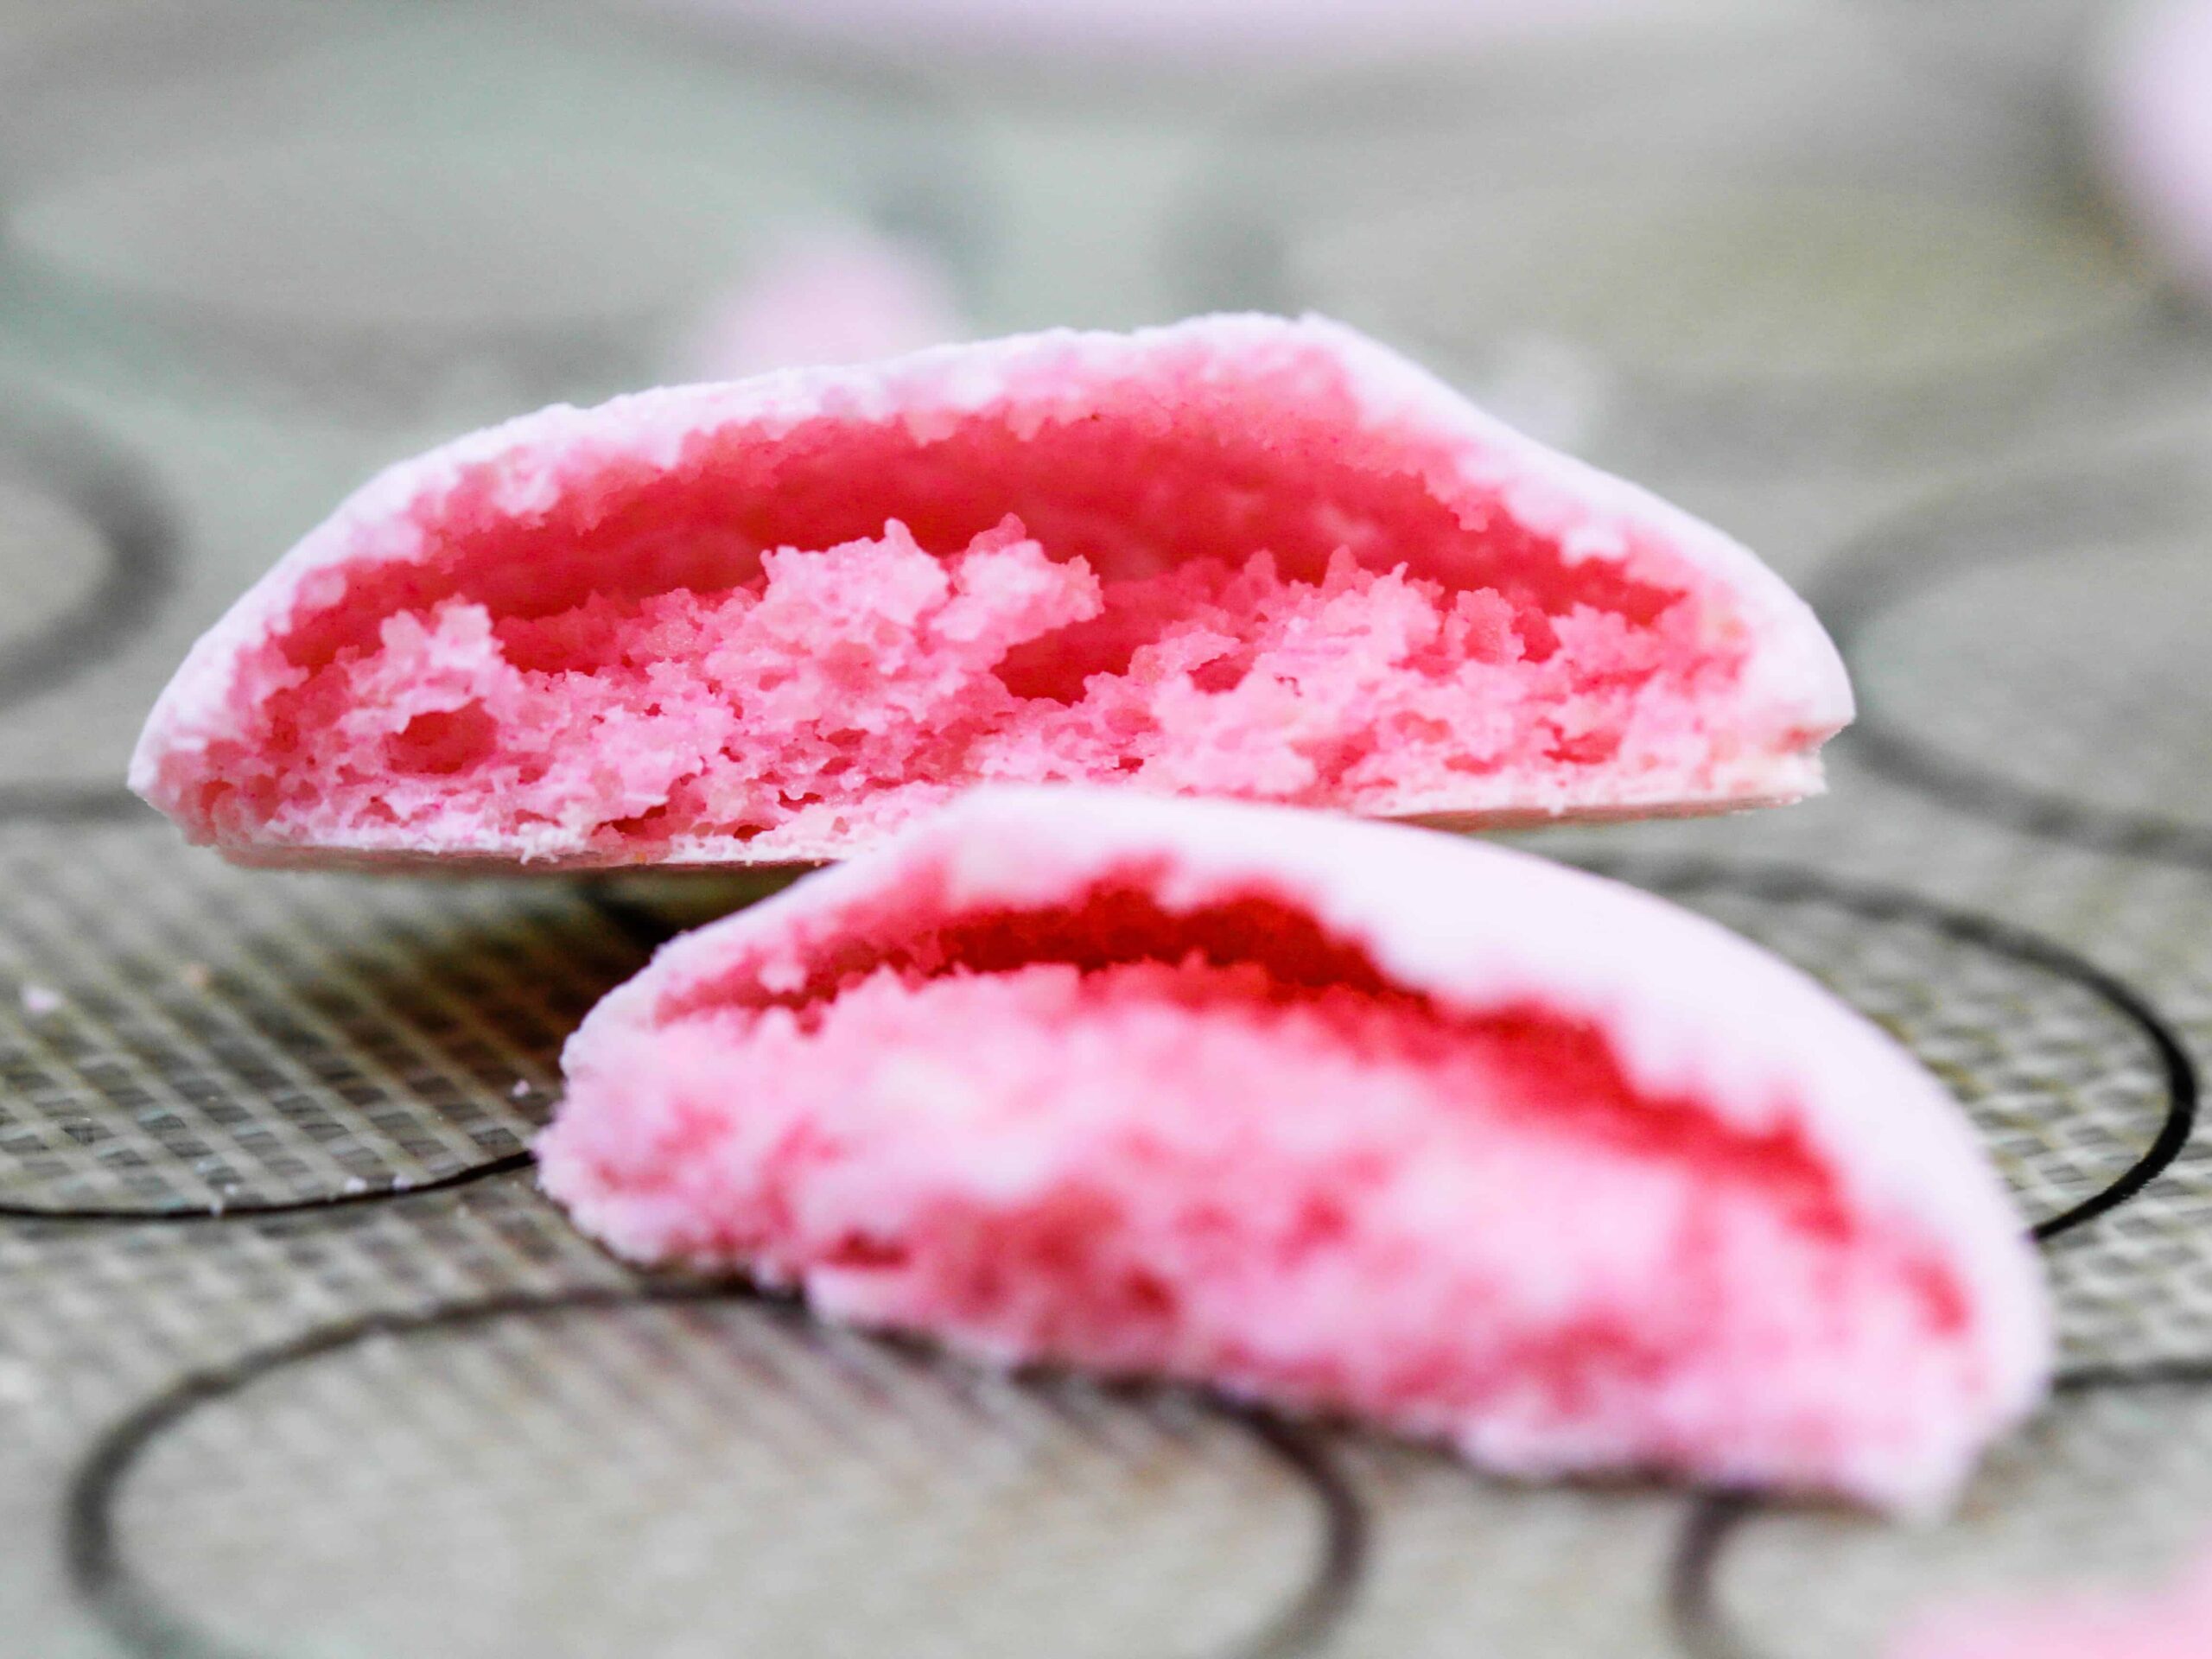 image of hollow italian macarons that were not banged against a counter before being baked included in a macaron troubleshooting guide explaining how to avoid this issue